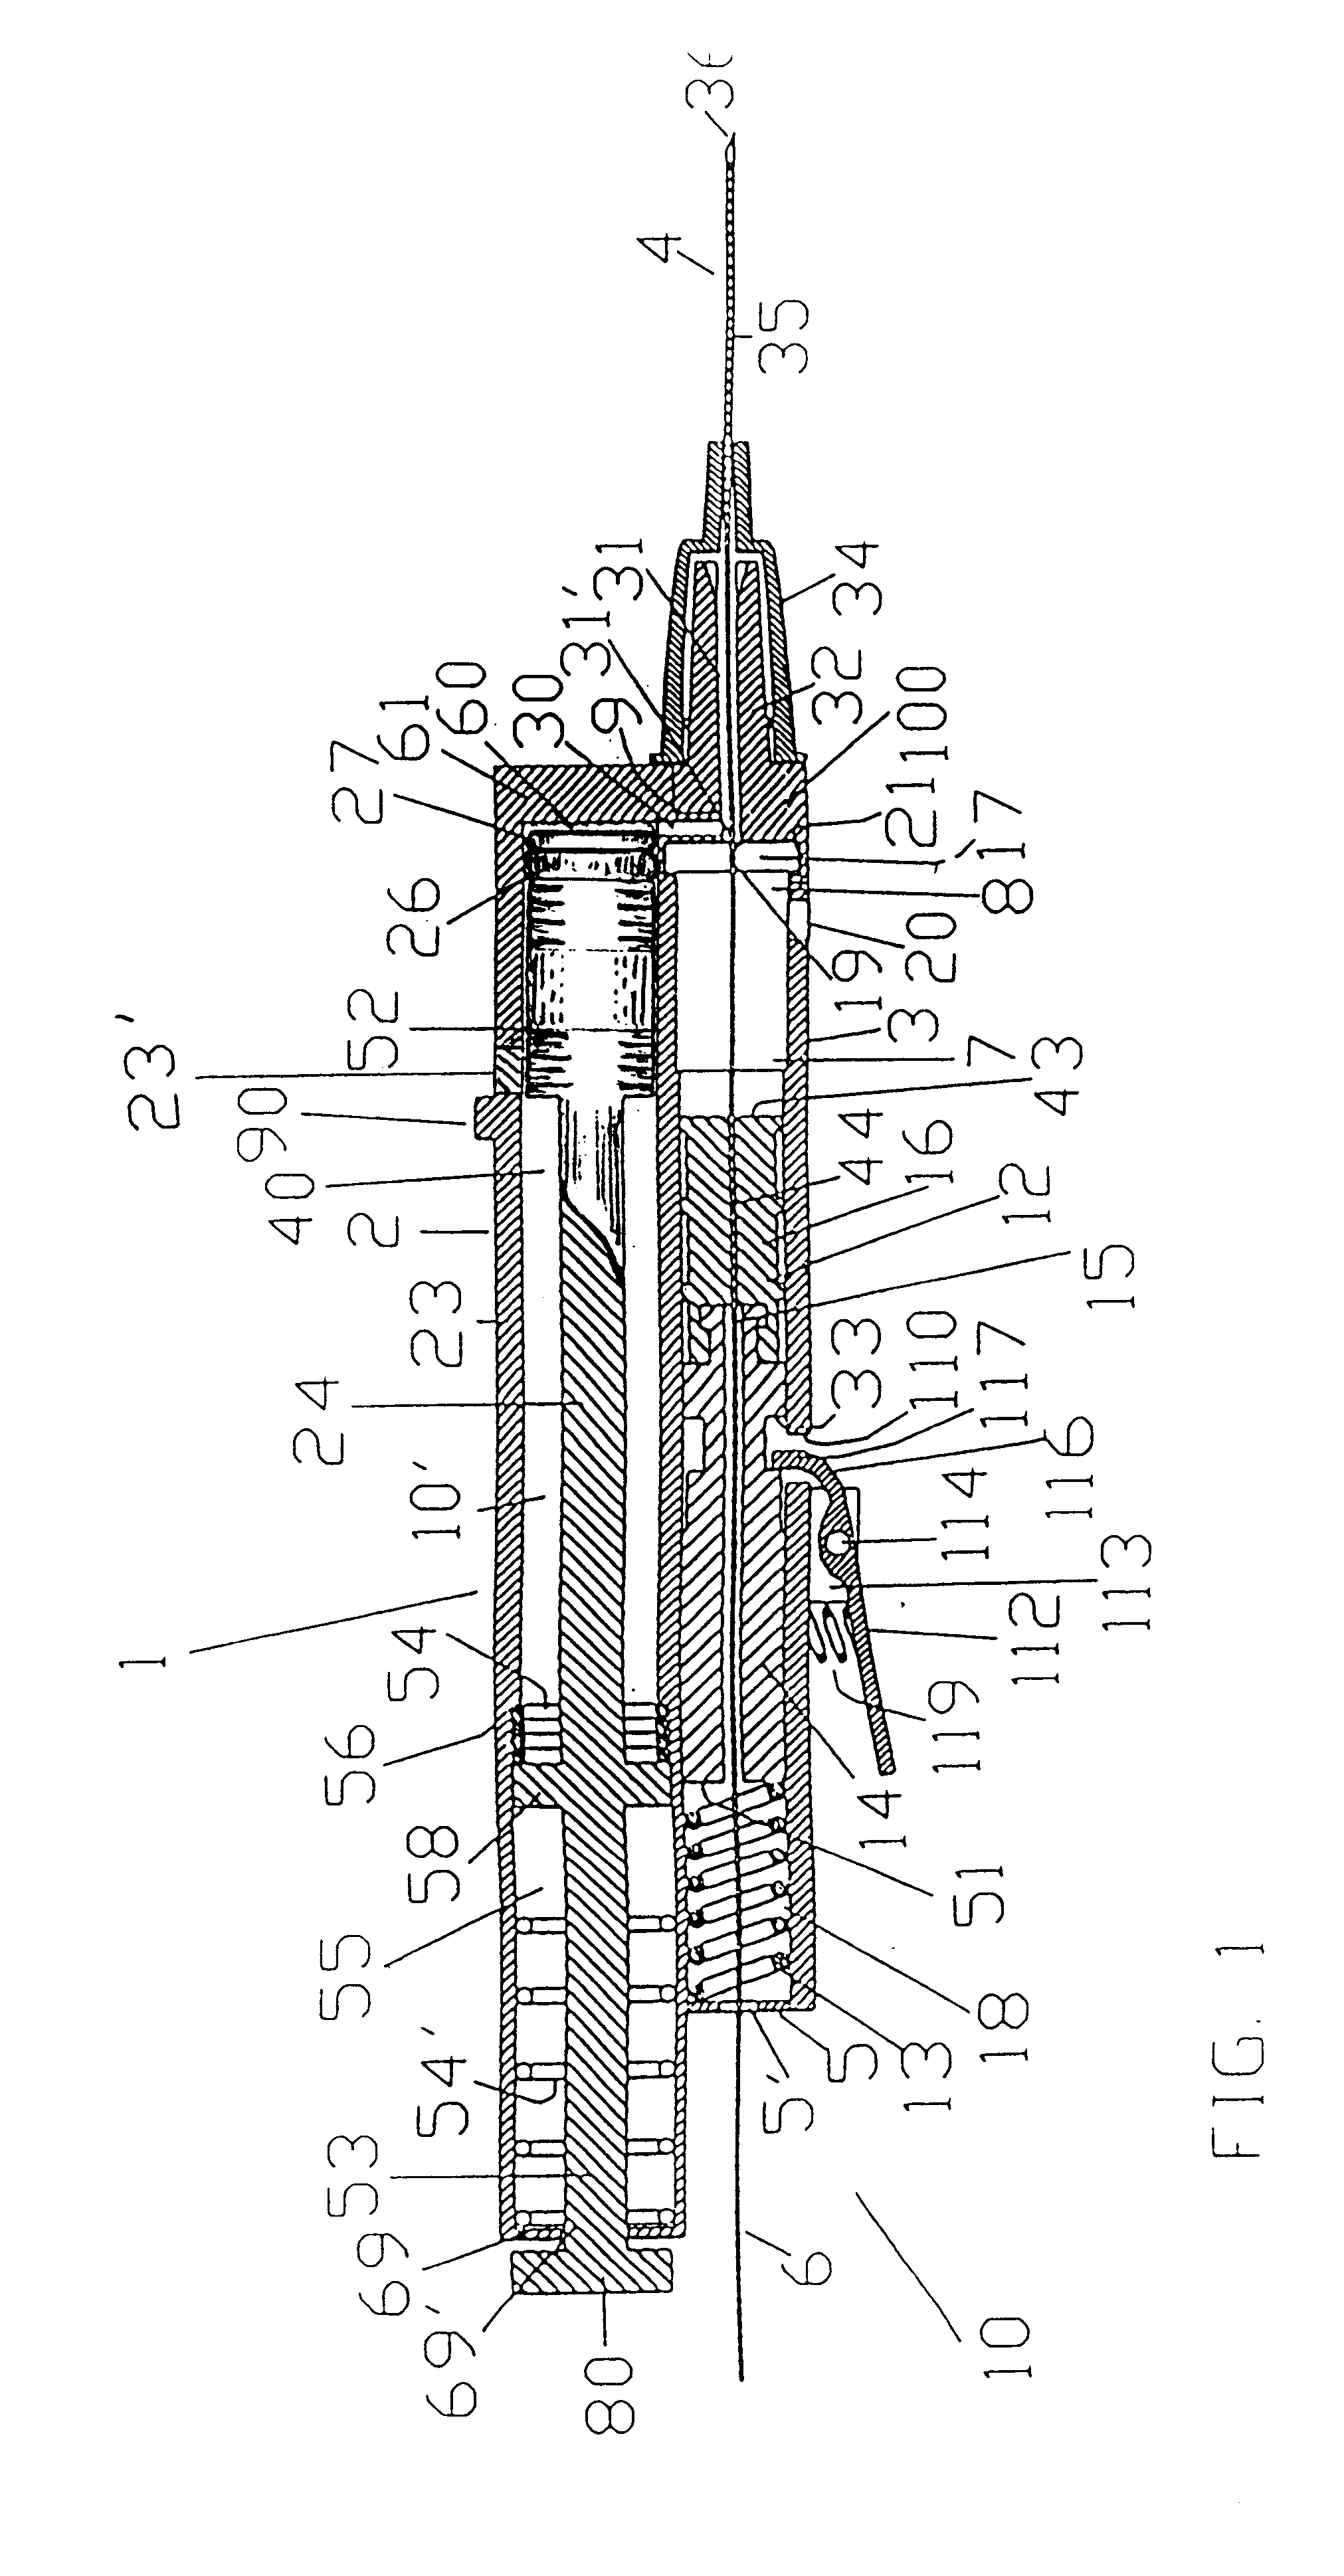 Apparatus for blood vessel type differentiation for syringes and guidewires placement devices